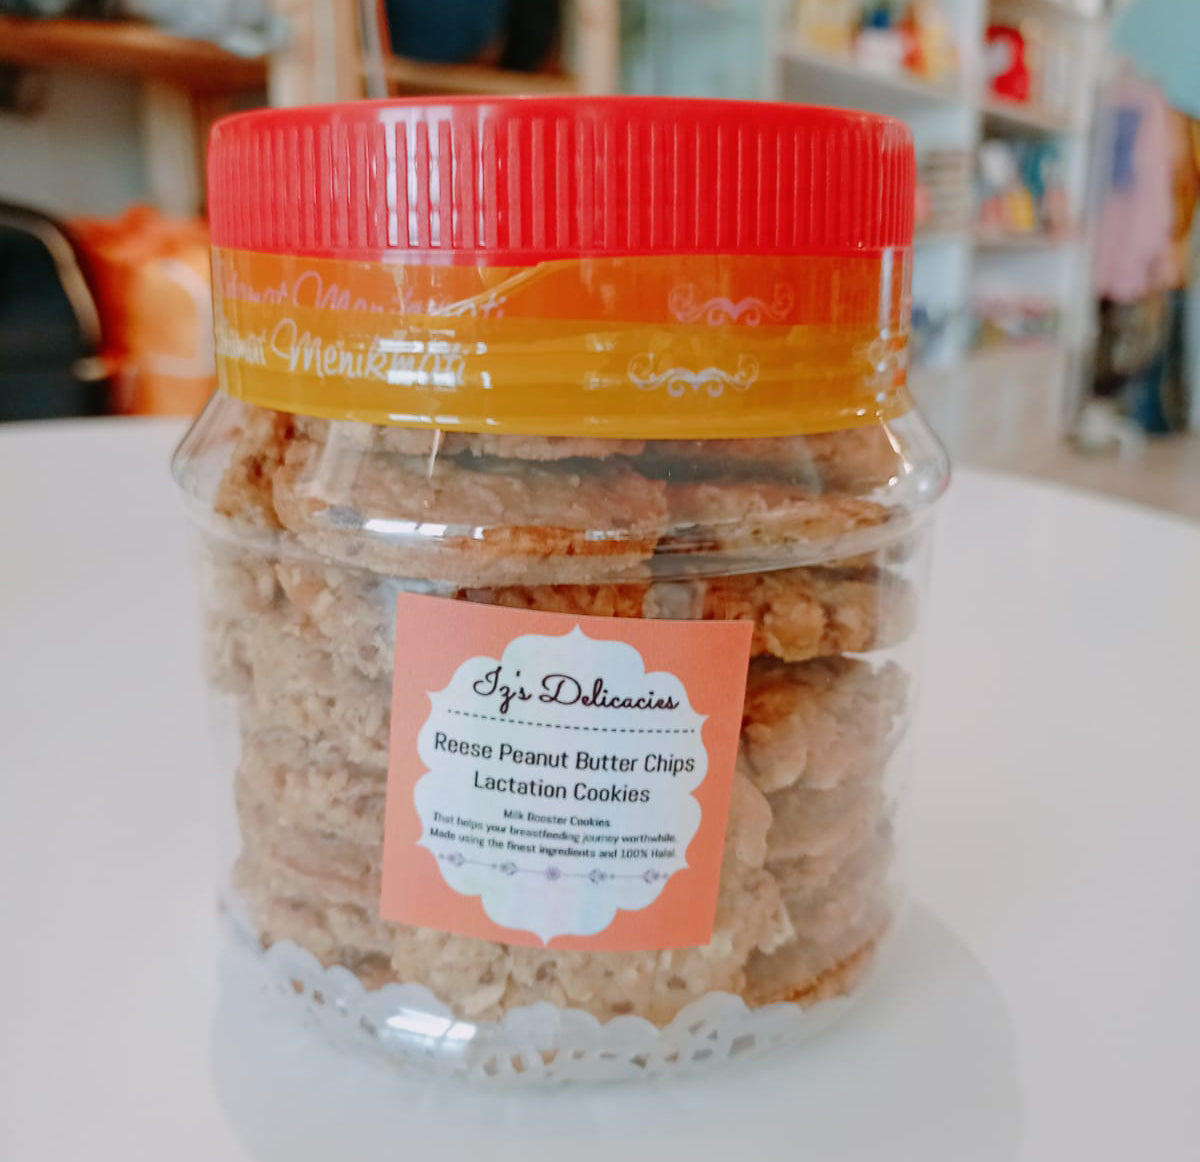 Izs Delicacies Lactation Cookies - Reese Peanut Butter Chips